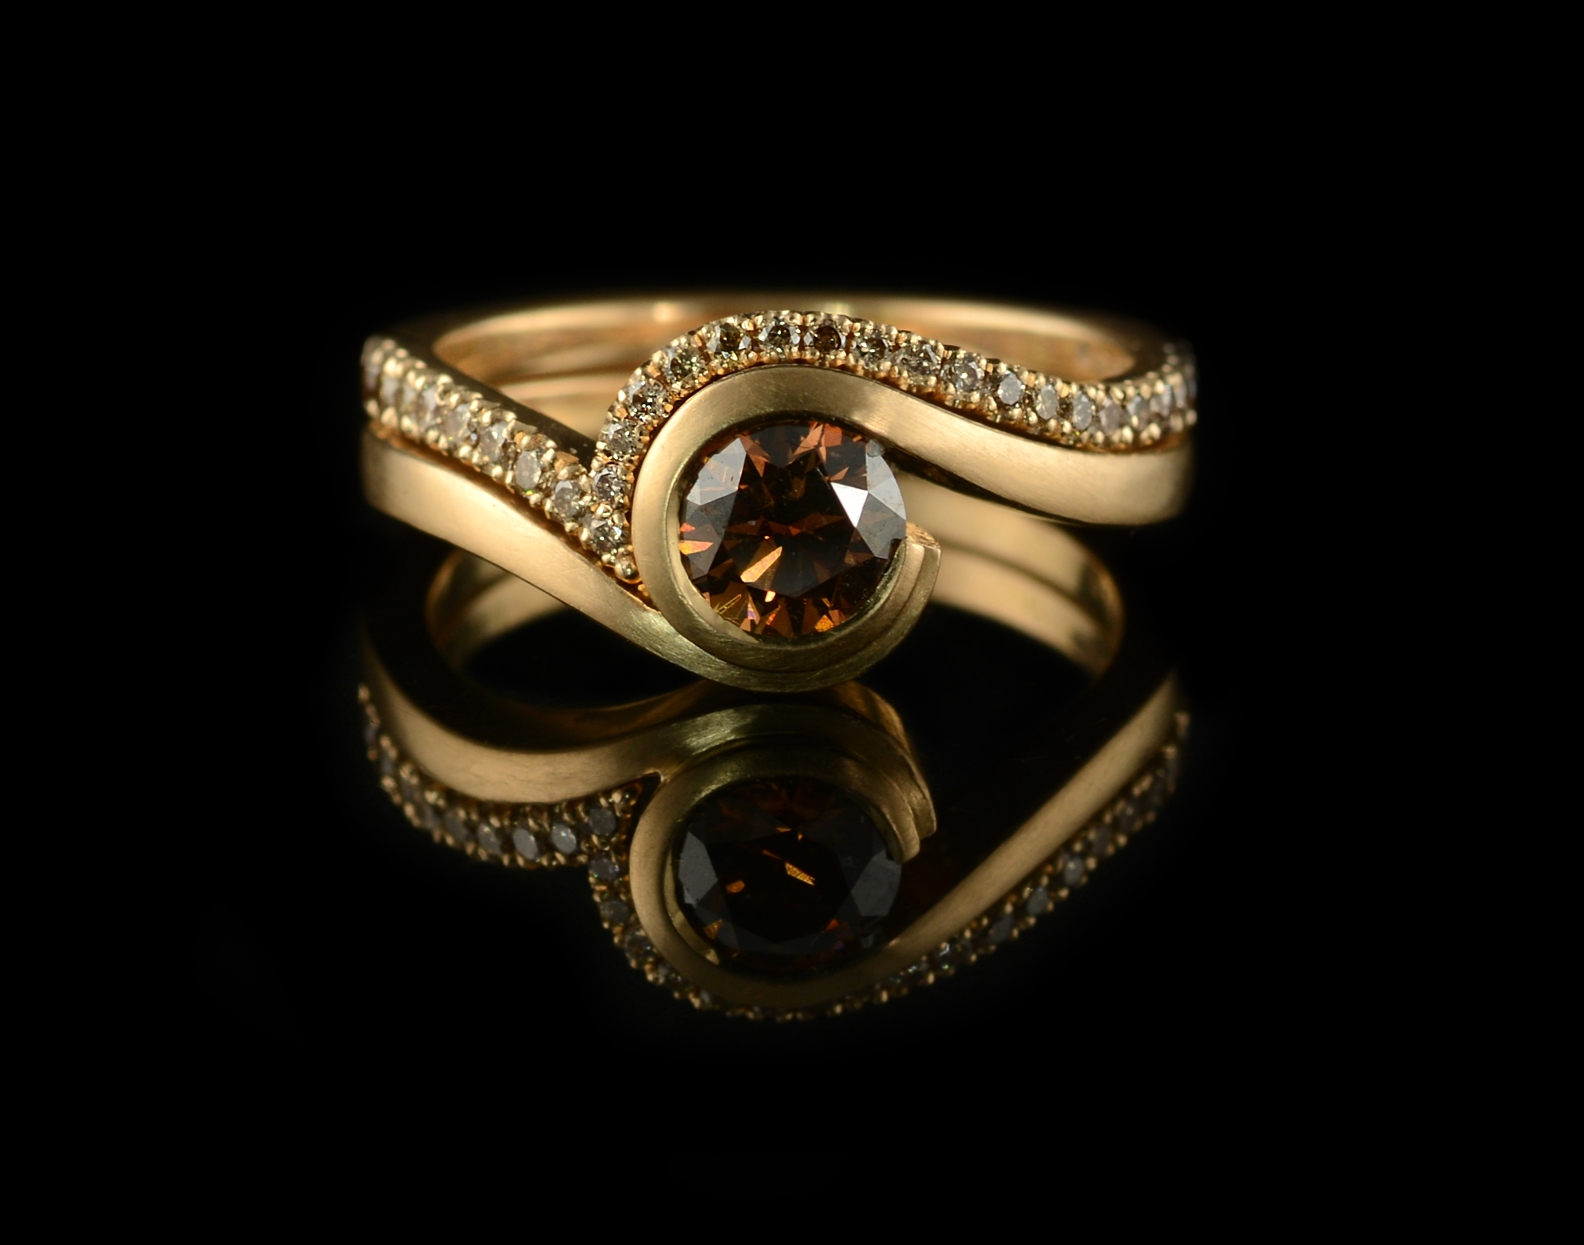 Cognac diamond rose gold engagement ring with fitted wedding band